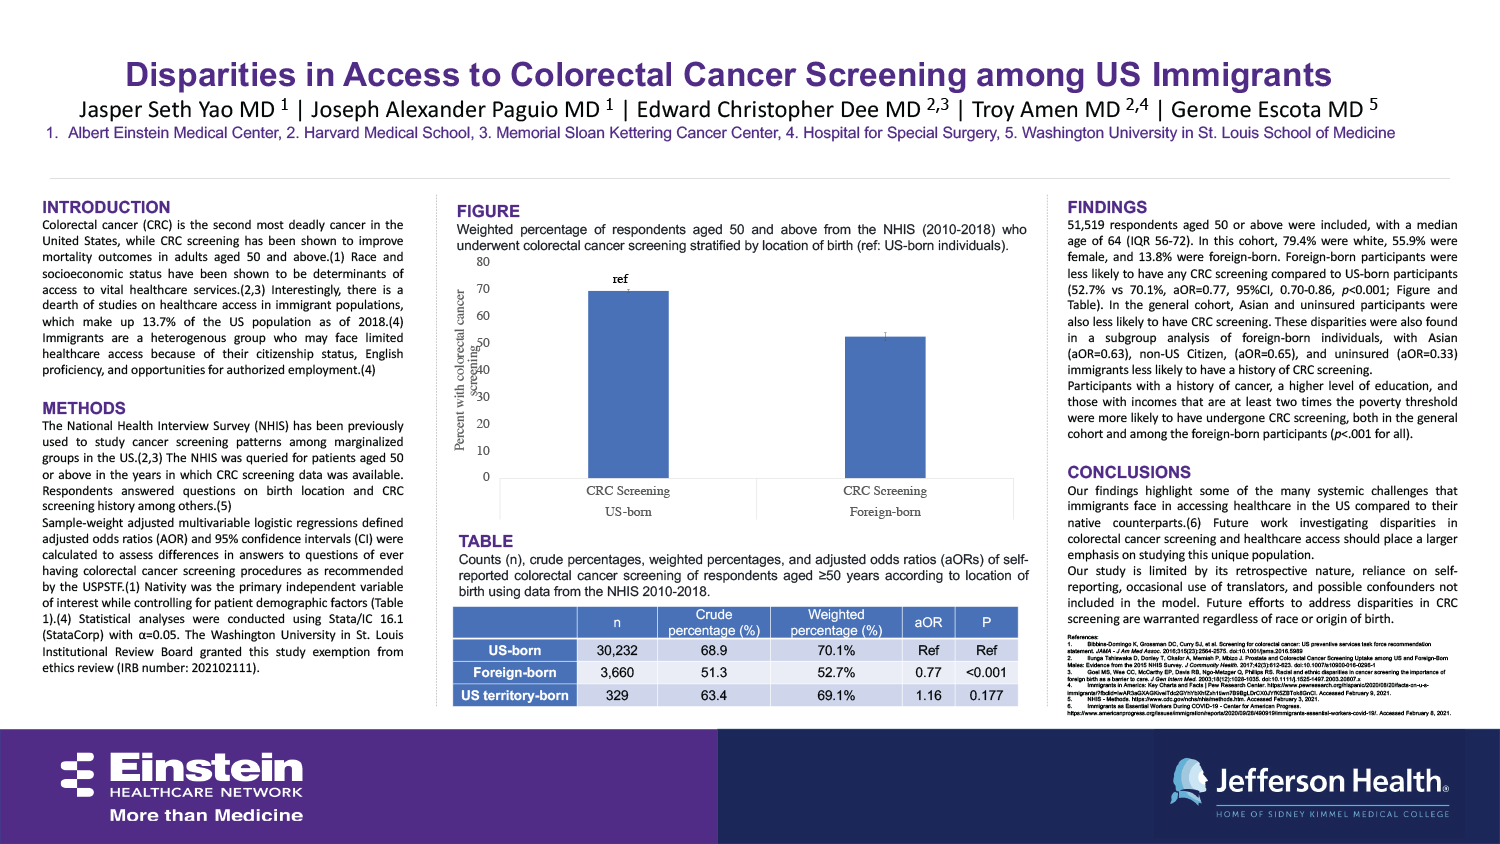 Jasper Seth Yao - PAS-32-Disparities-In-Access-To-Colorectal-Cancer-Screening-In-US-Immigrants